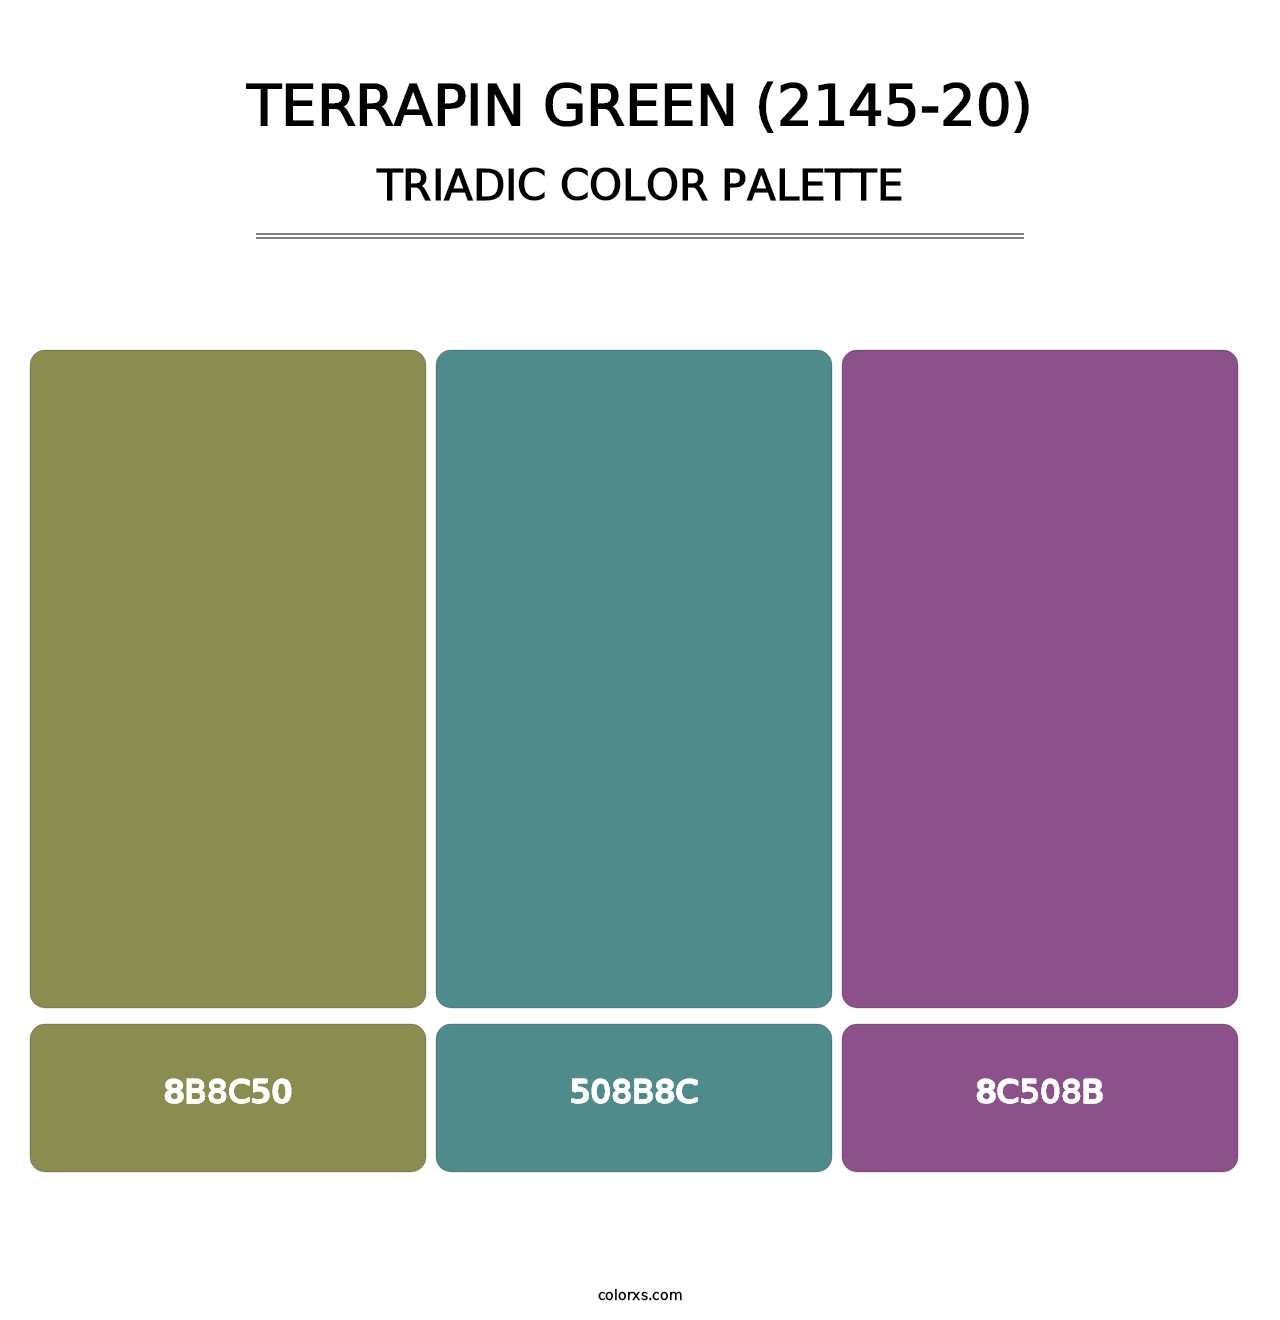 Terrapin Green (2145-20) - Triadic Color Palette